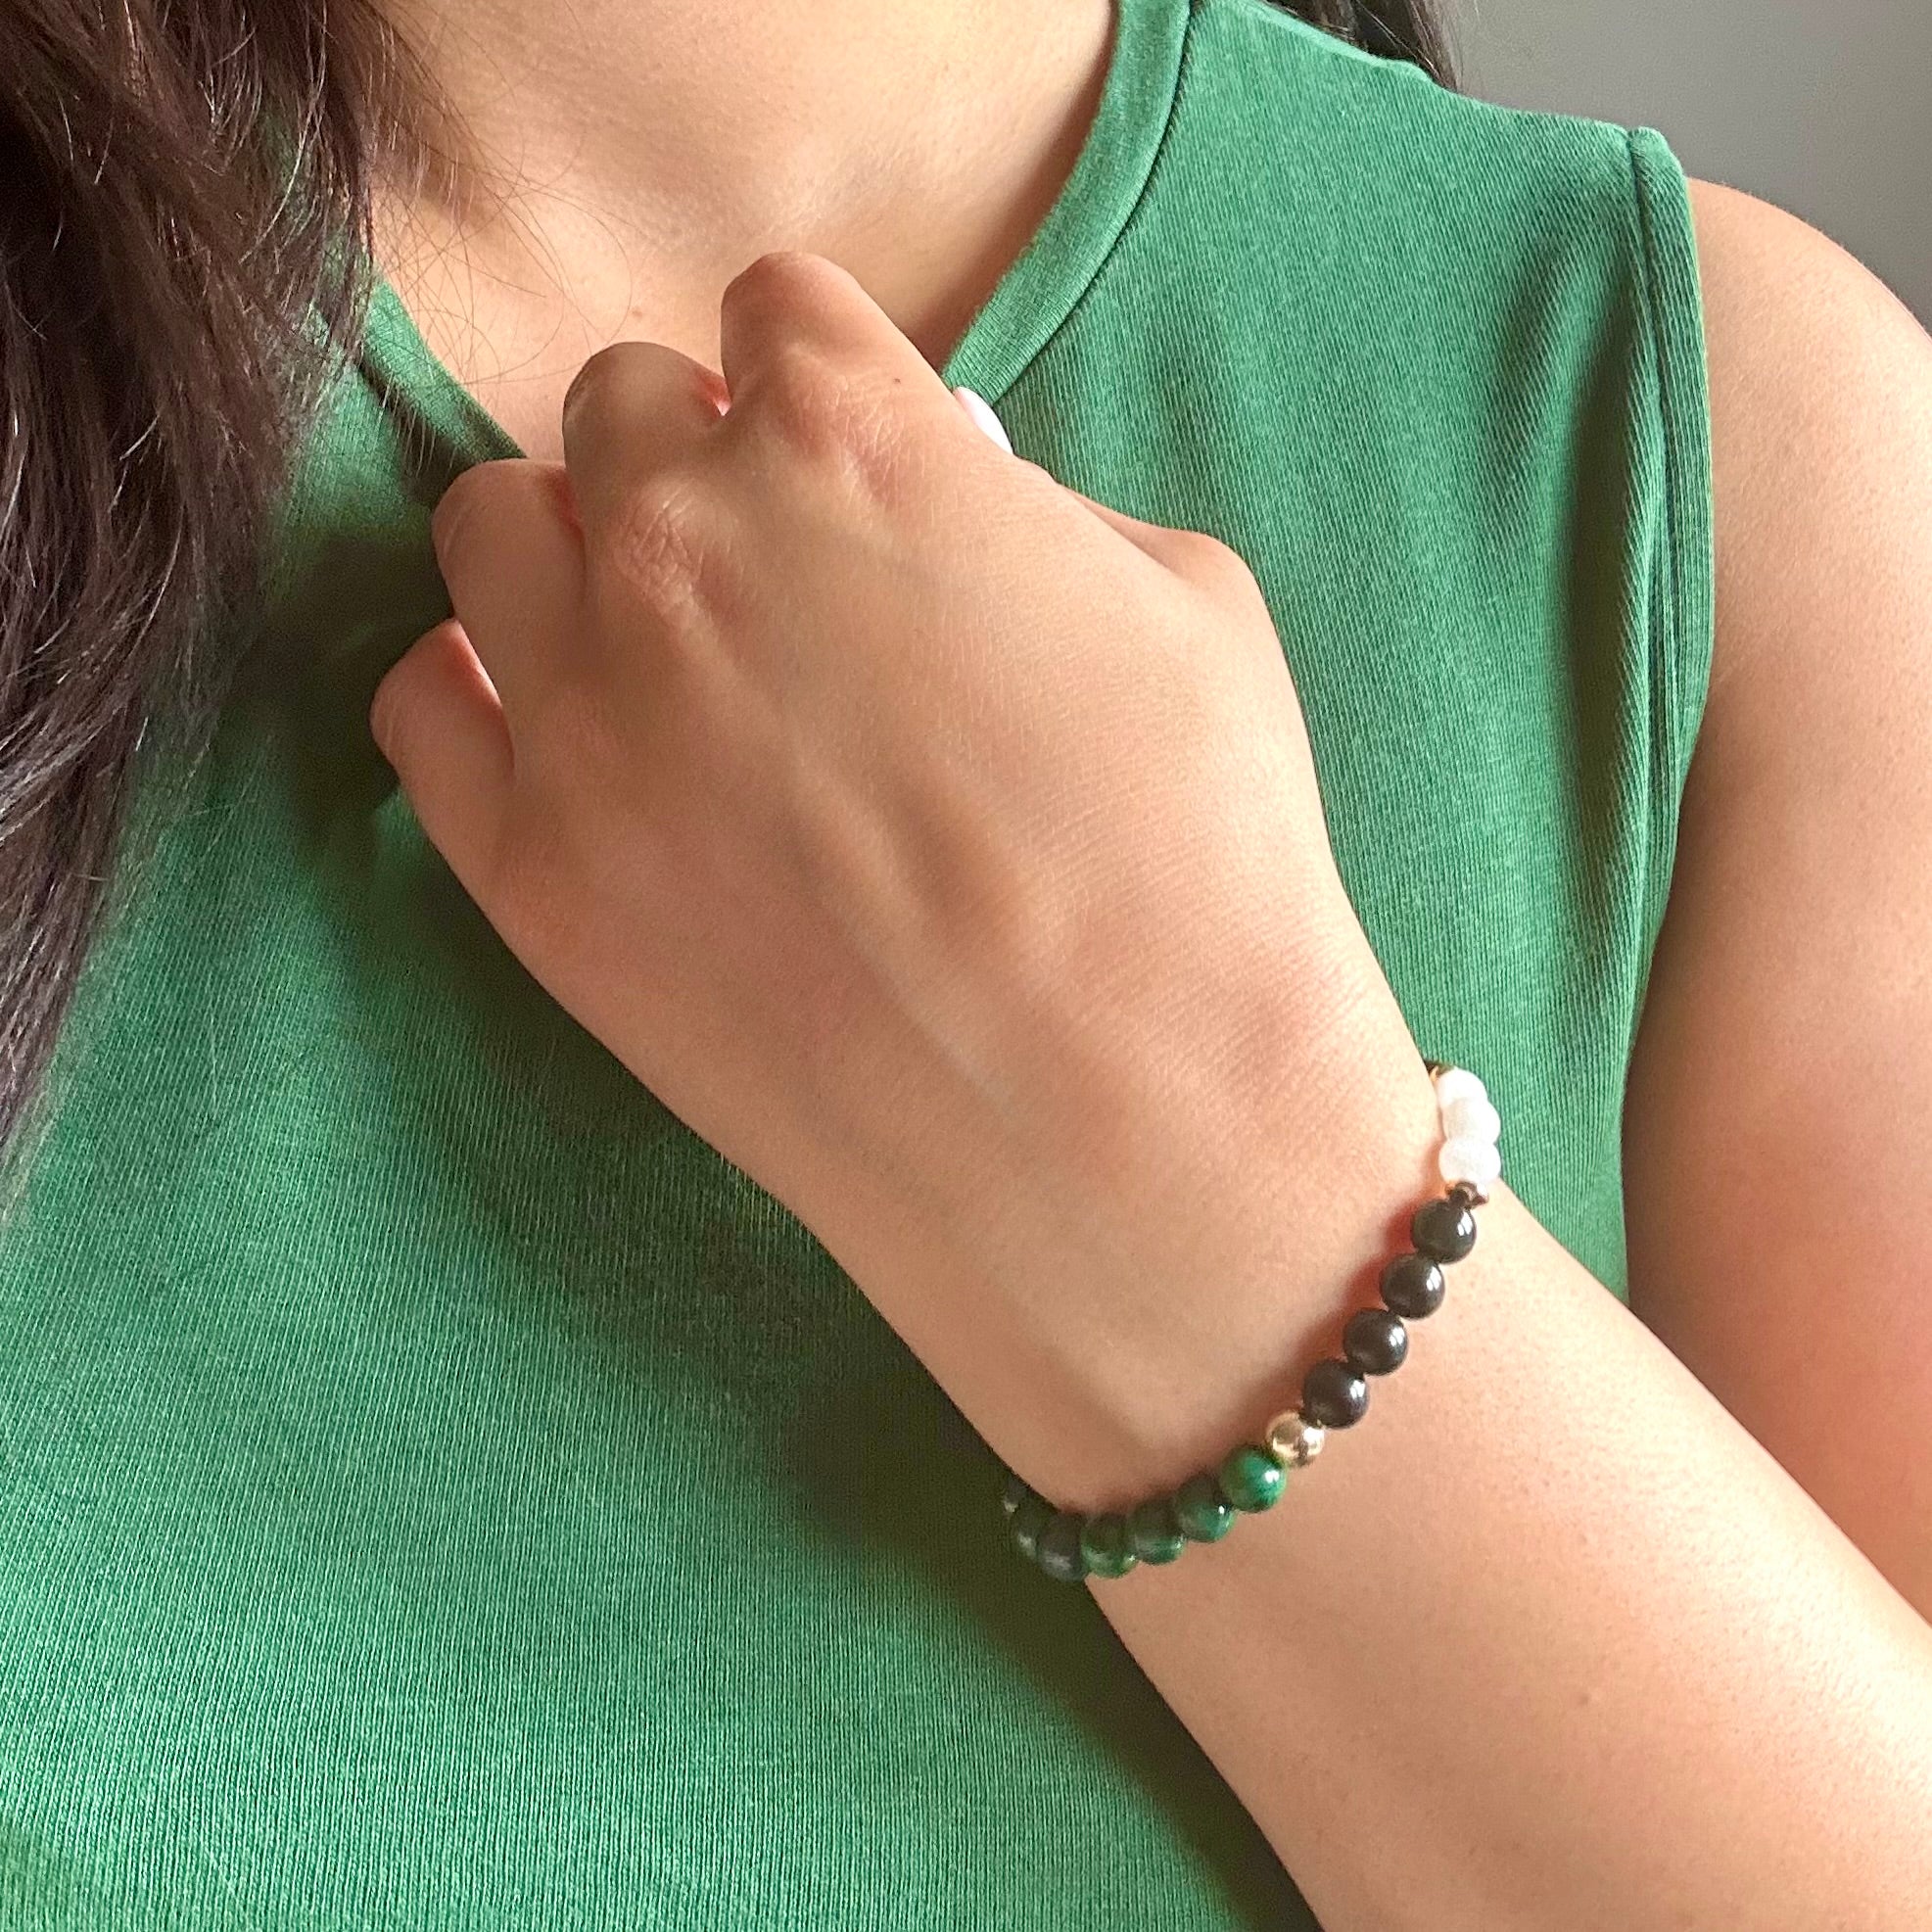 Malachite, Moonstone & Obisidian. This bracelet is not only stylish, it also is great for those who are working on their future and want / need all the protection they can get.